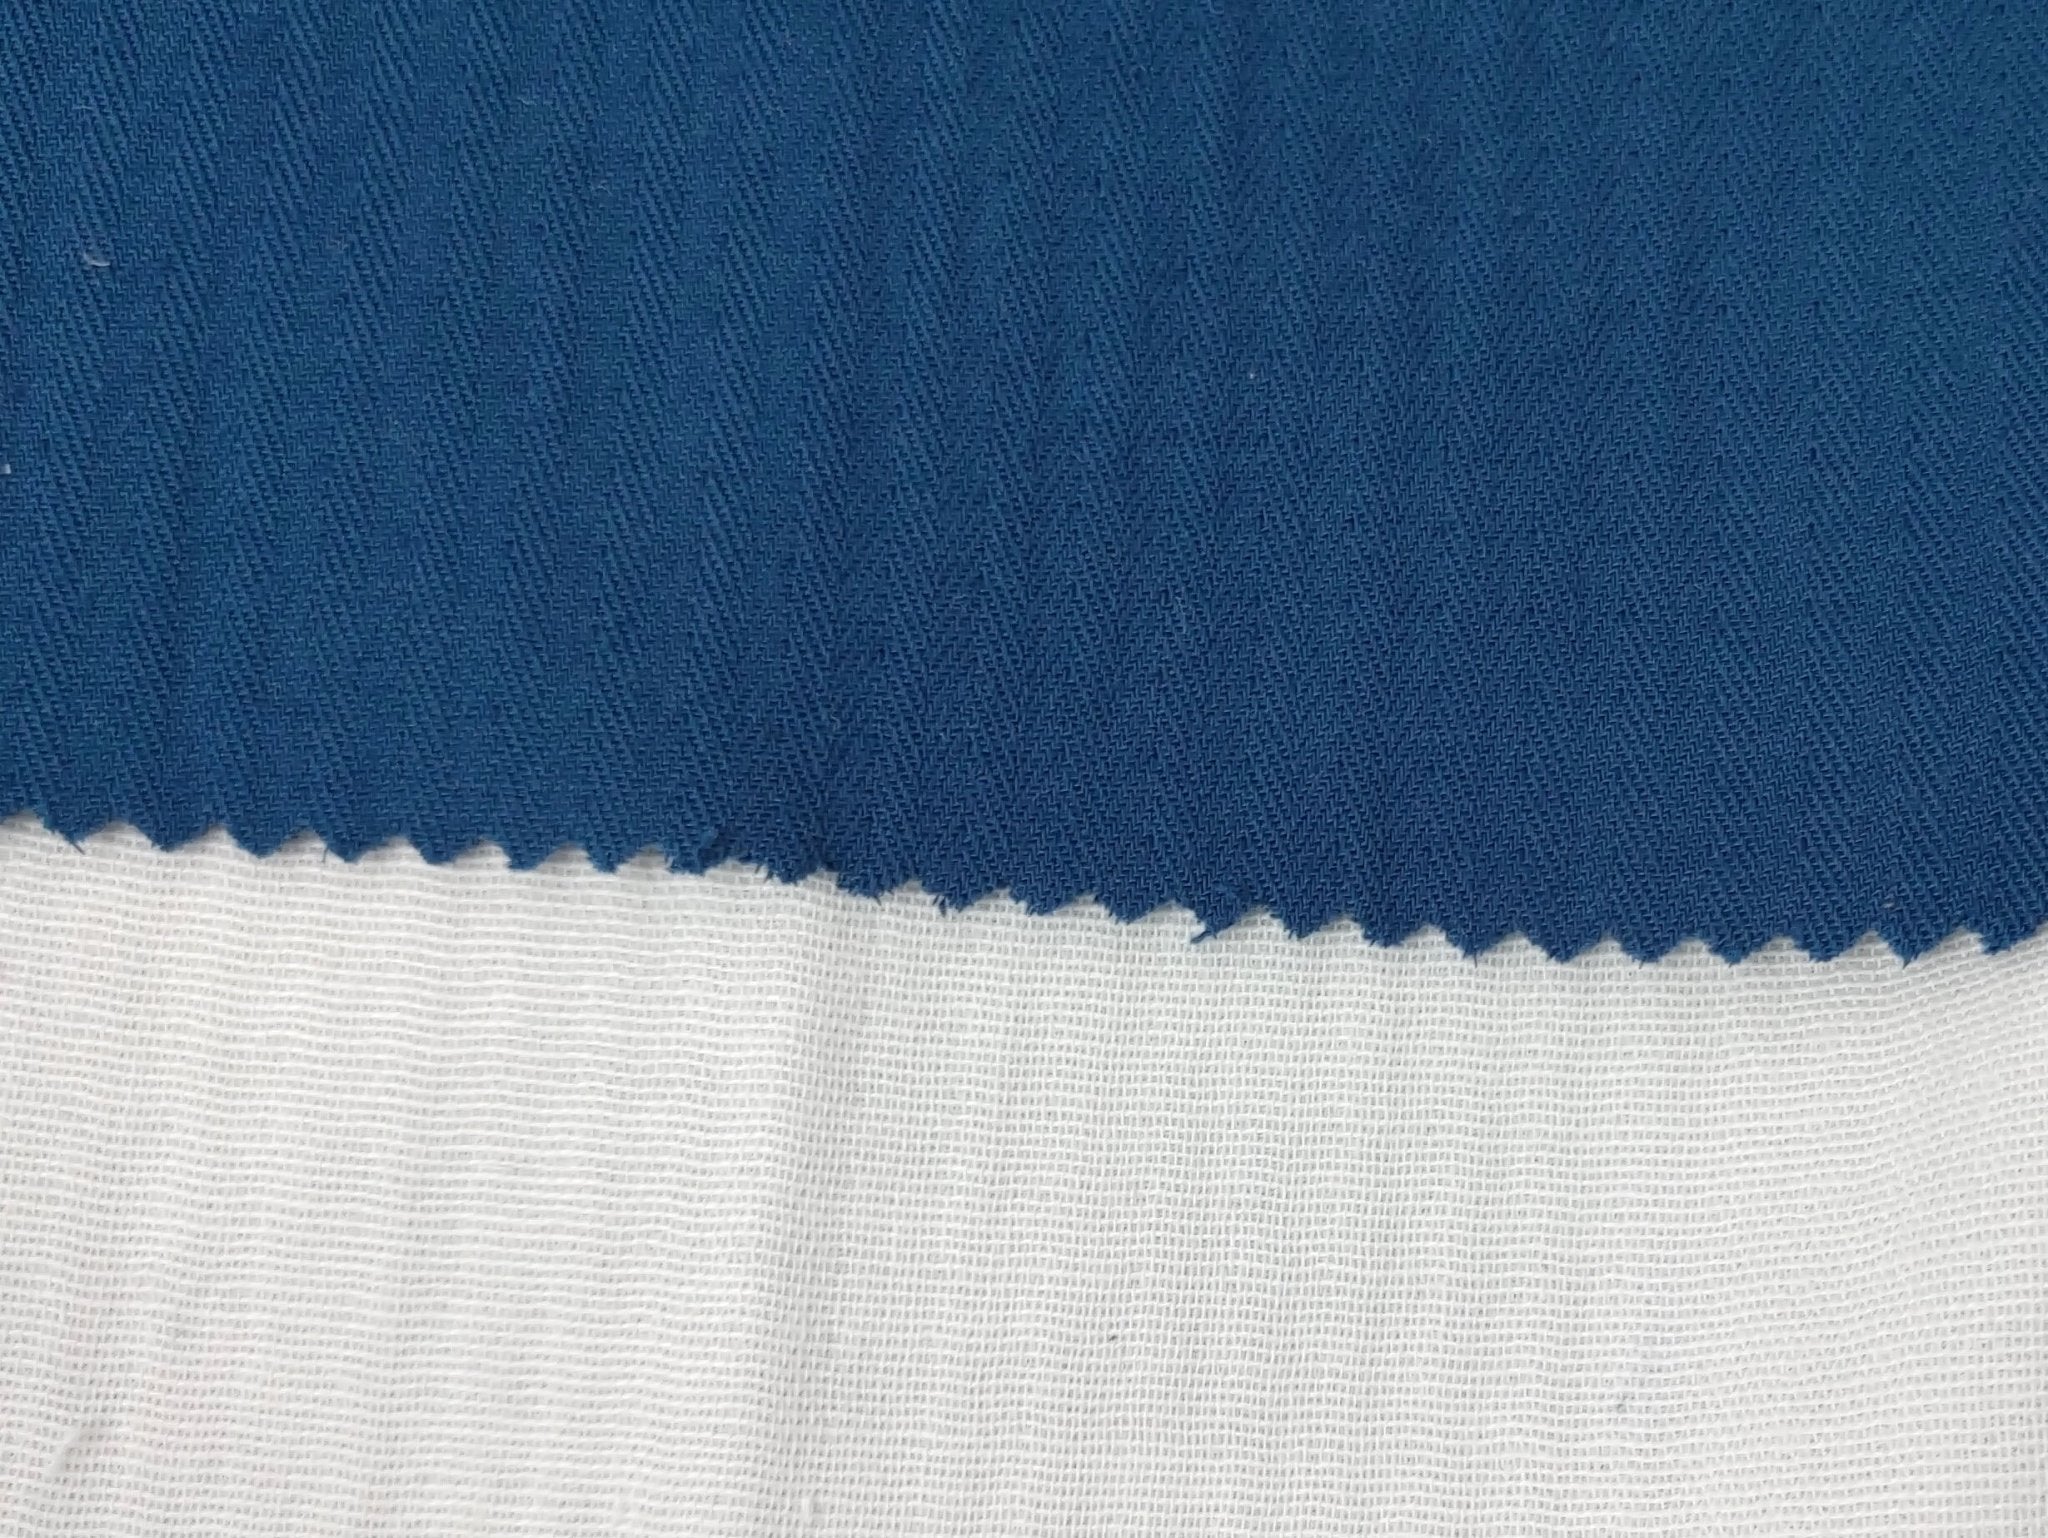 Double-Faced Herringbone Twill: 100% Cotton Fabric 7216 7215 - The Linen Lab - Blue